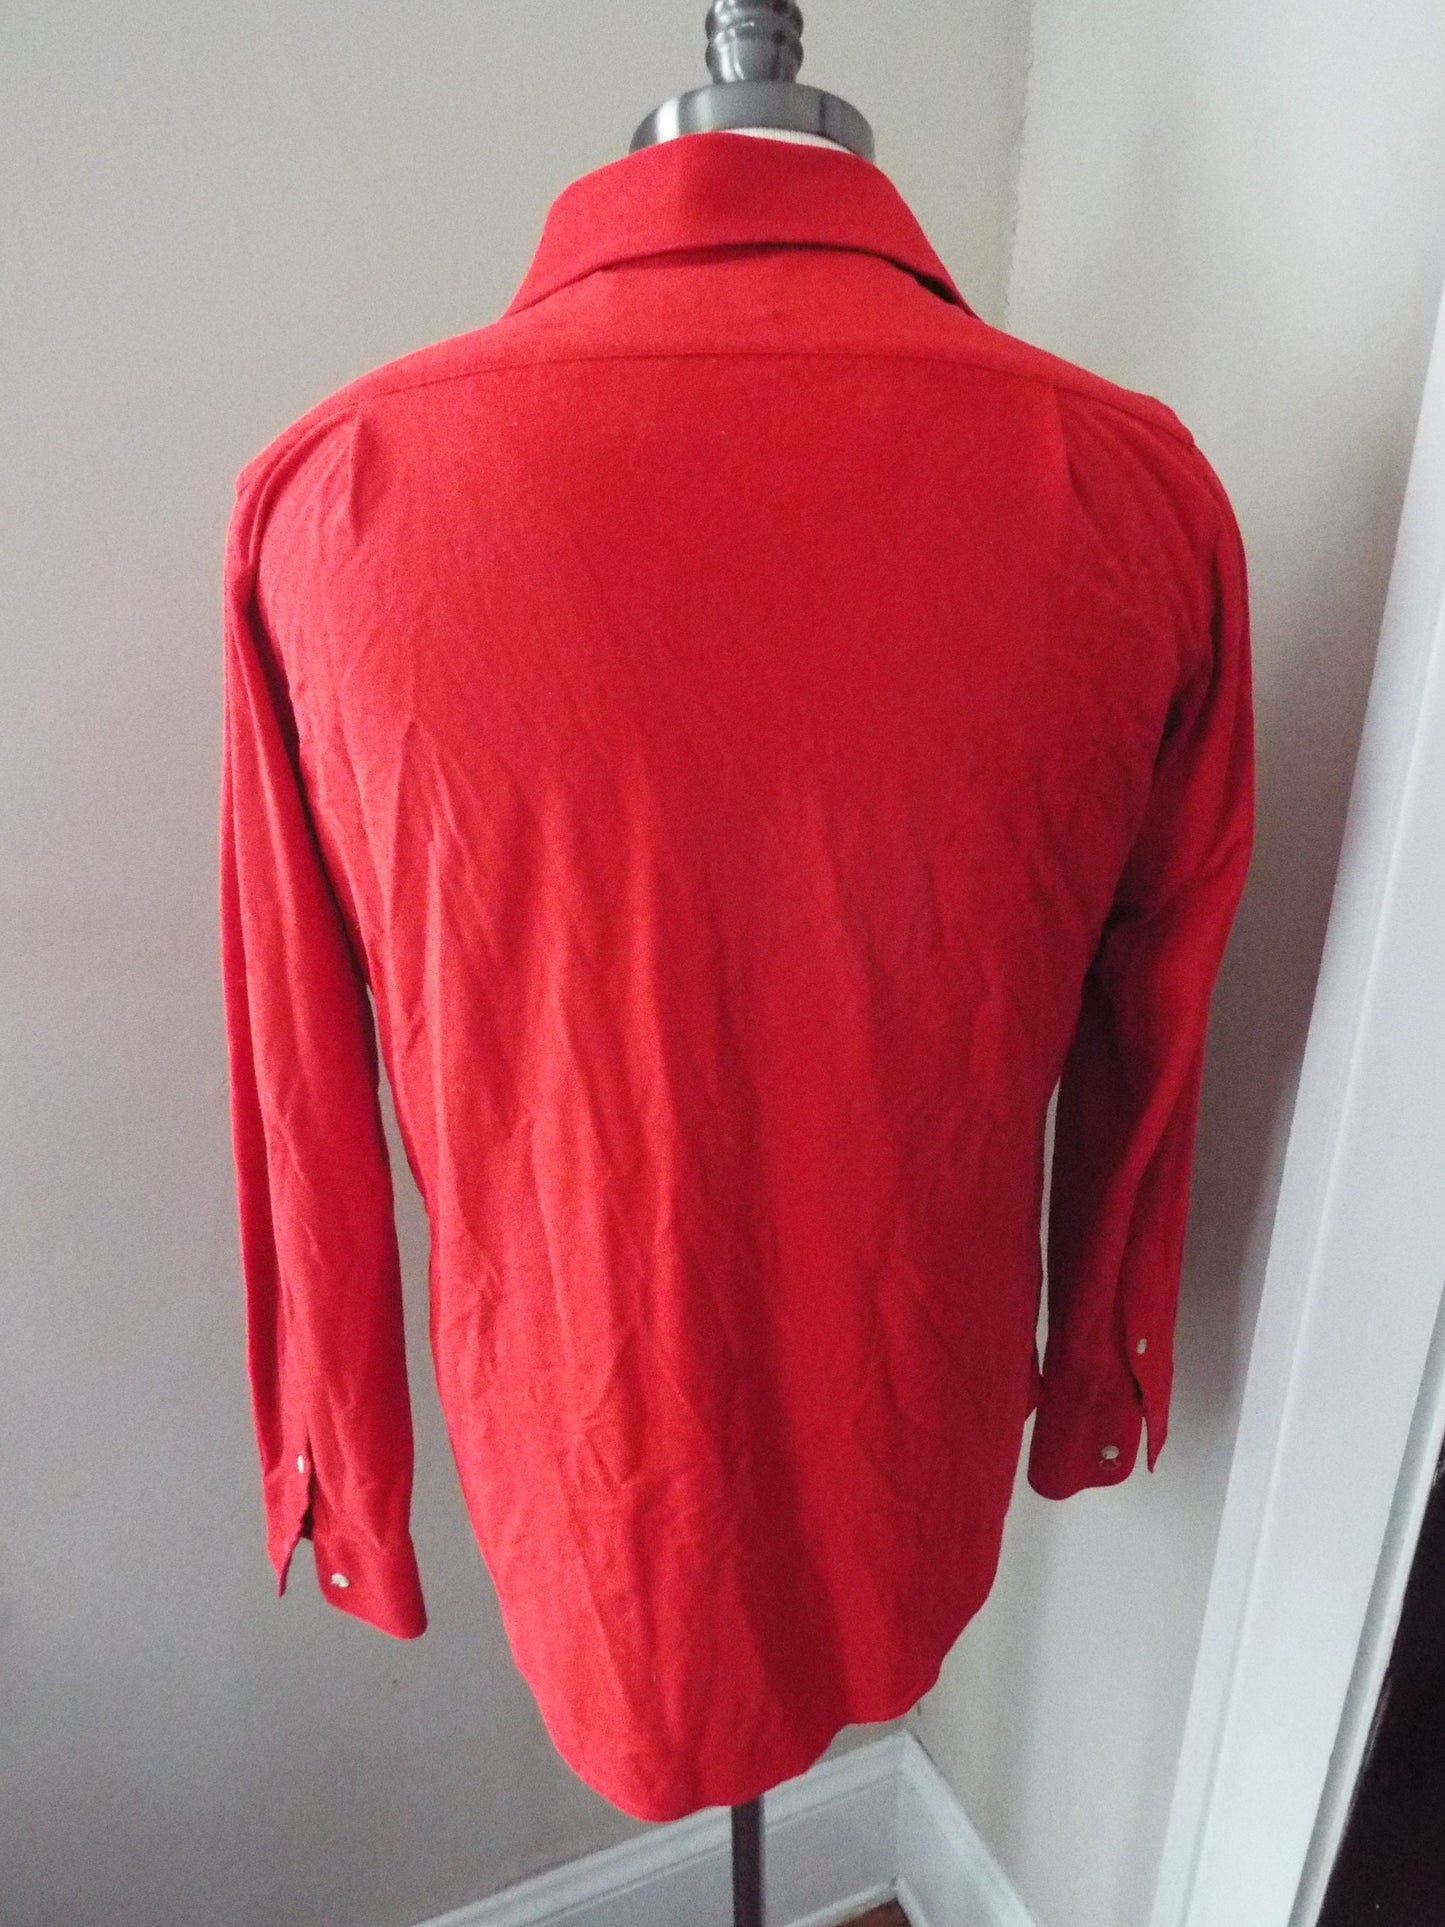 Vintage Long Sleeve Button Down Red Shirt by Sears Fieldmaster